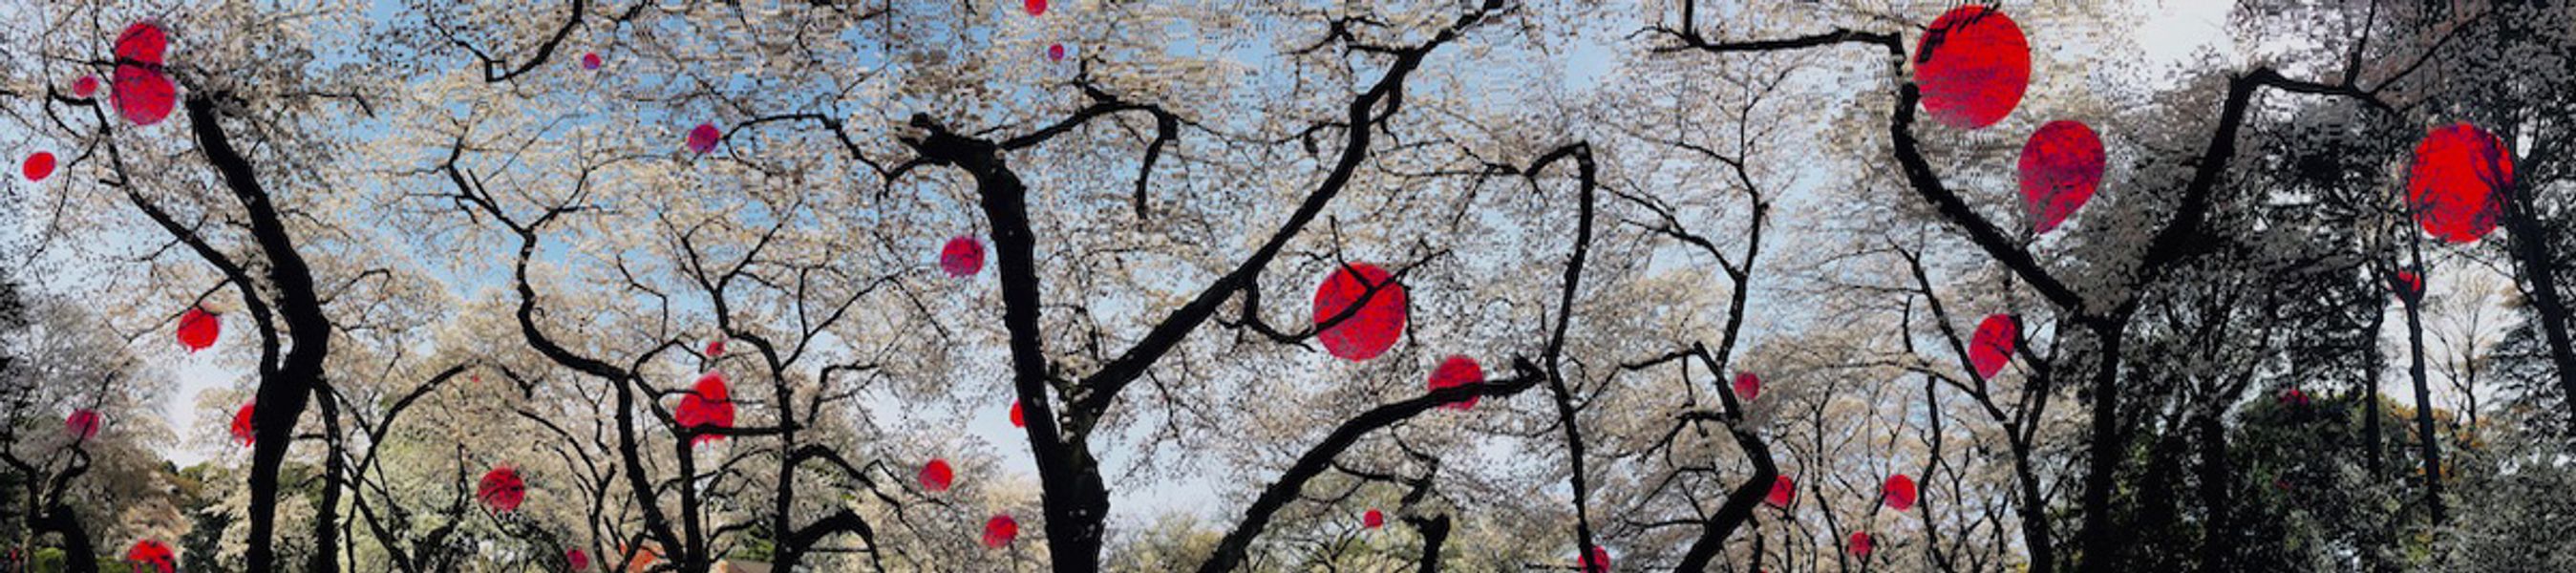 Delia Dickmann abstract photography panorama white cherry blossom trees and red circles